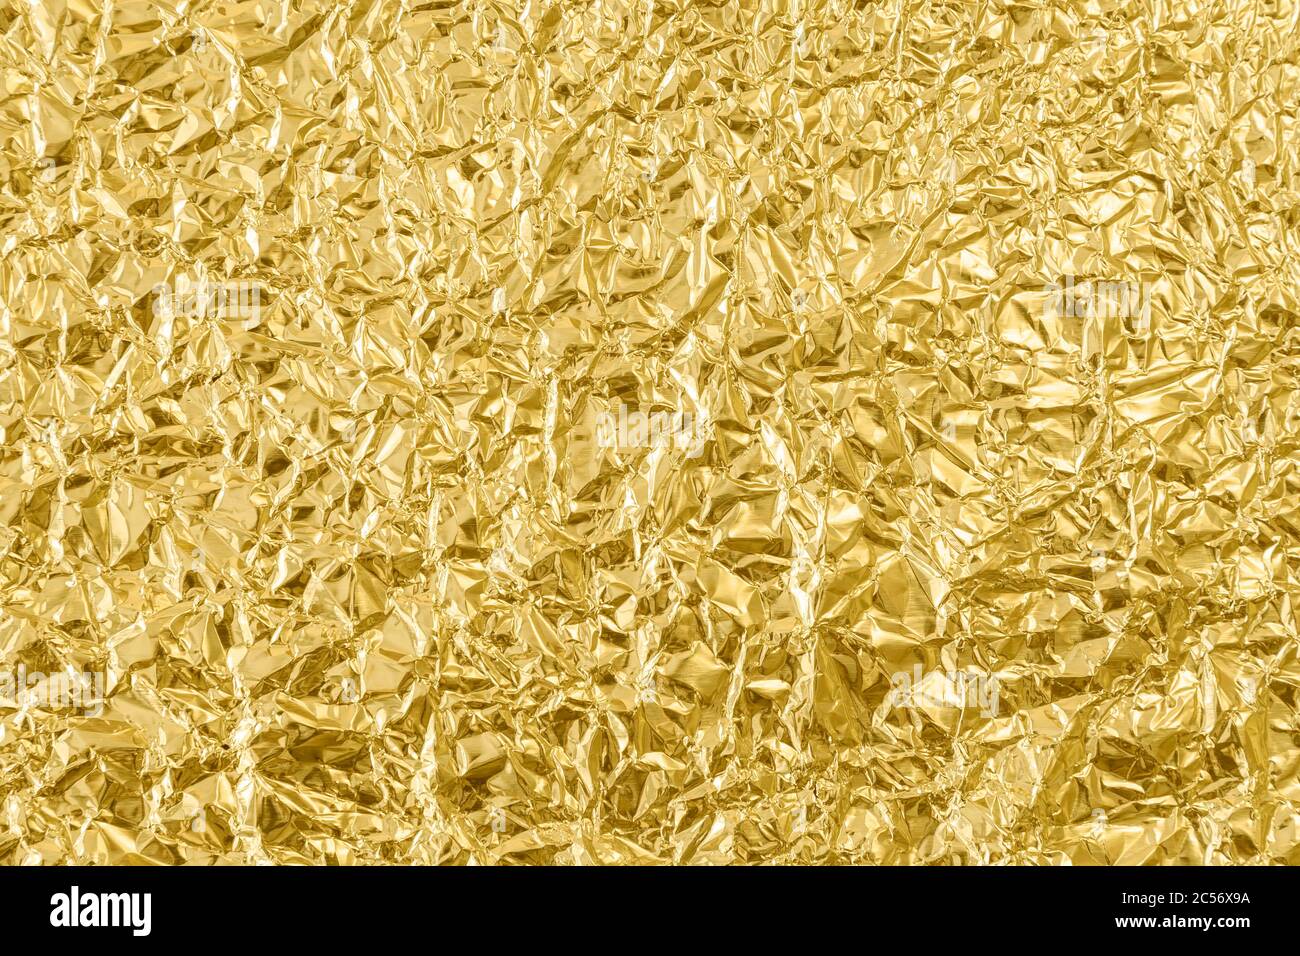 Close-up of a crumpled golden tin foil surface, top view. Abstract full frame textured silvery background. Stock Photo